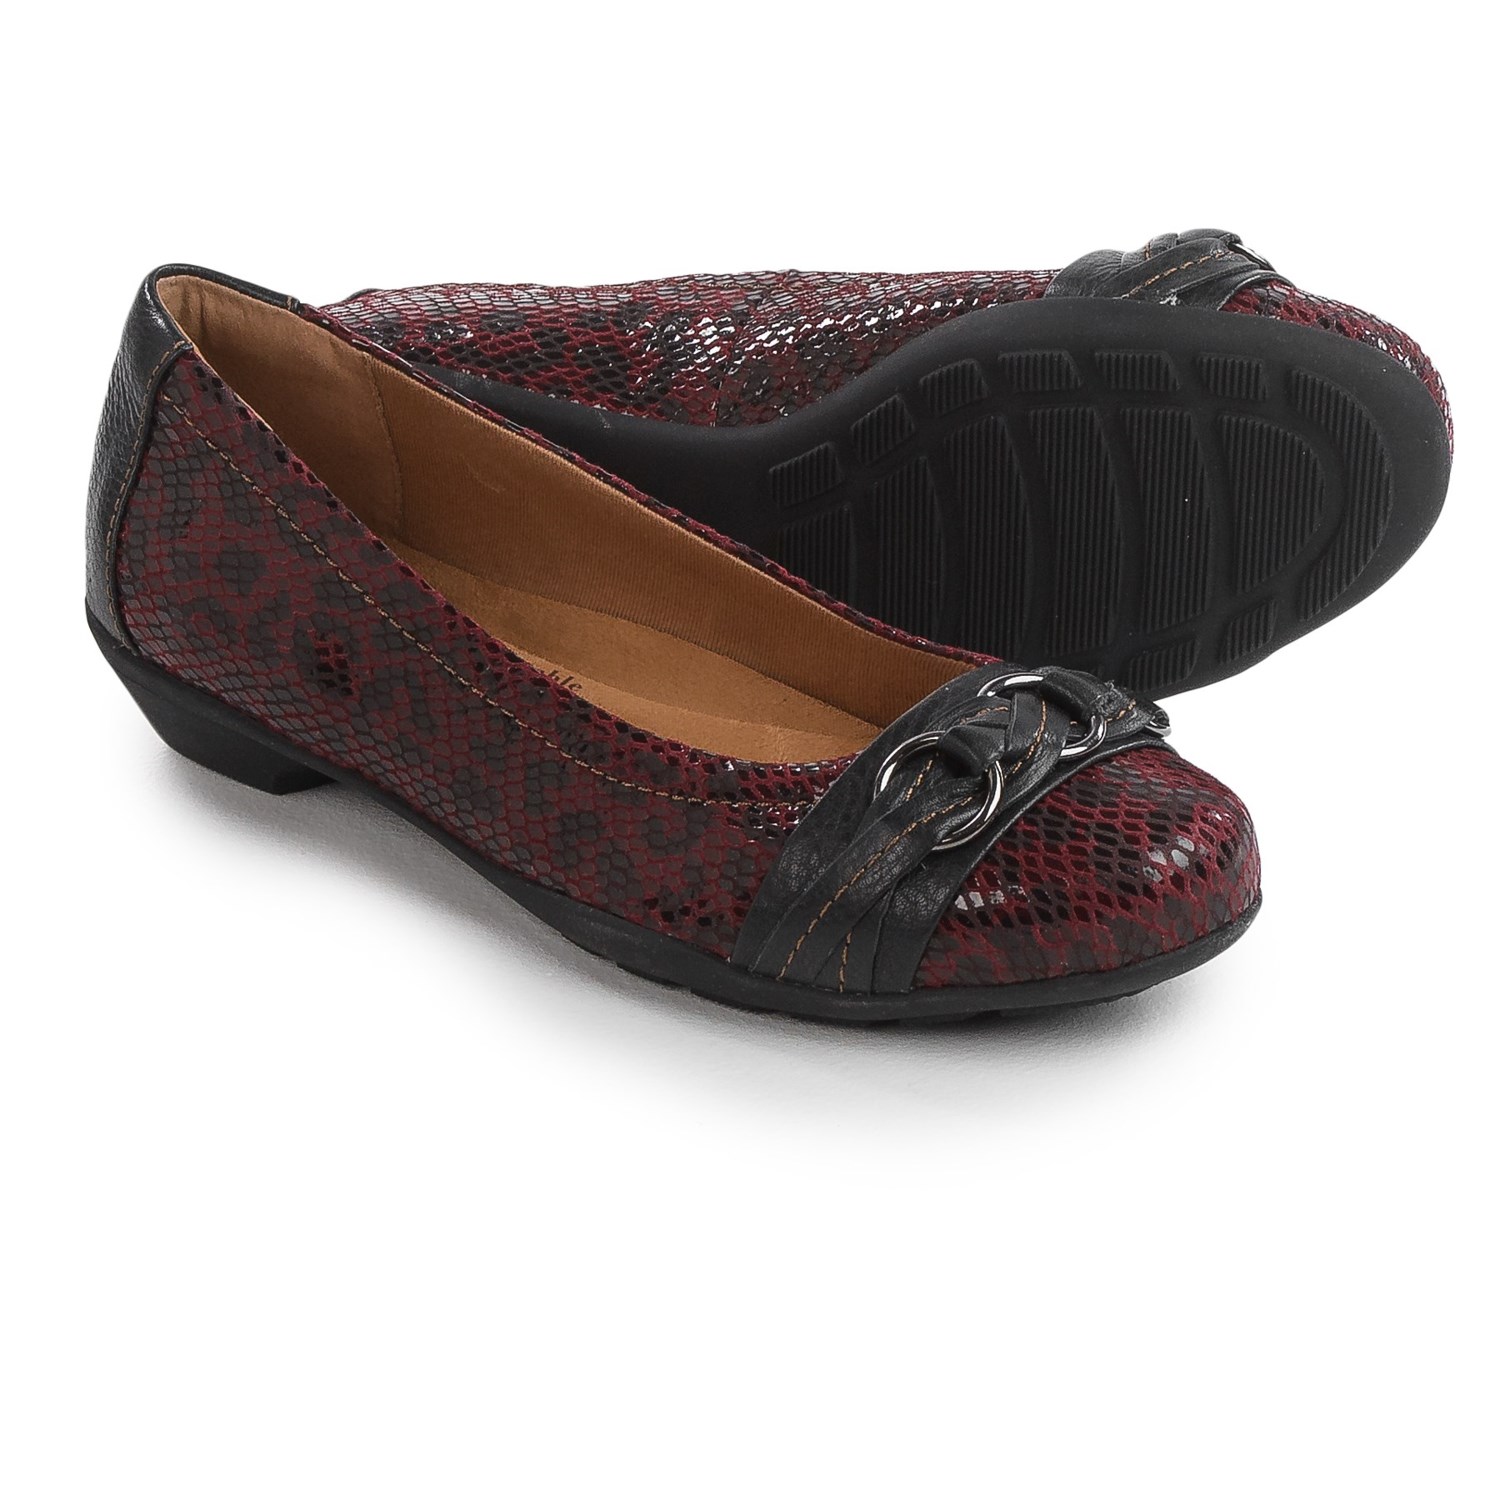 SoftSpots Posie Shoes (For Women) - Save 55%